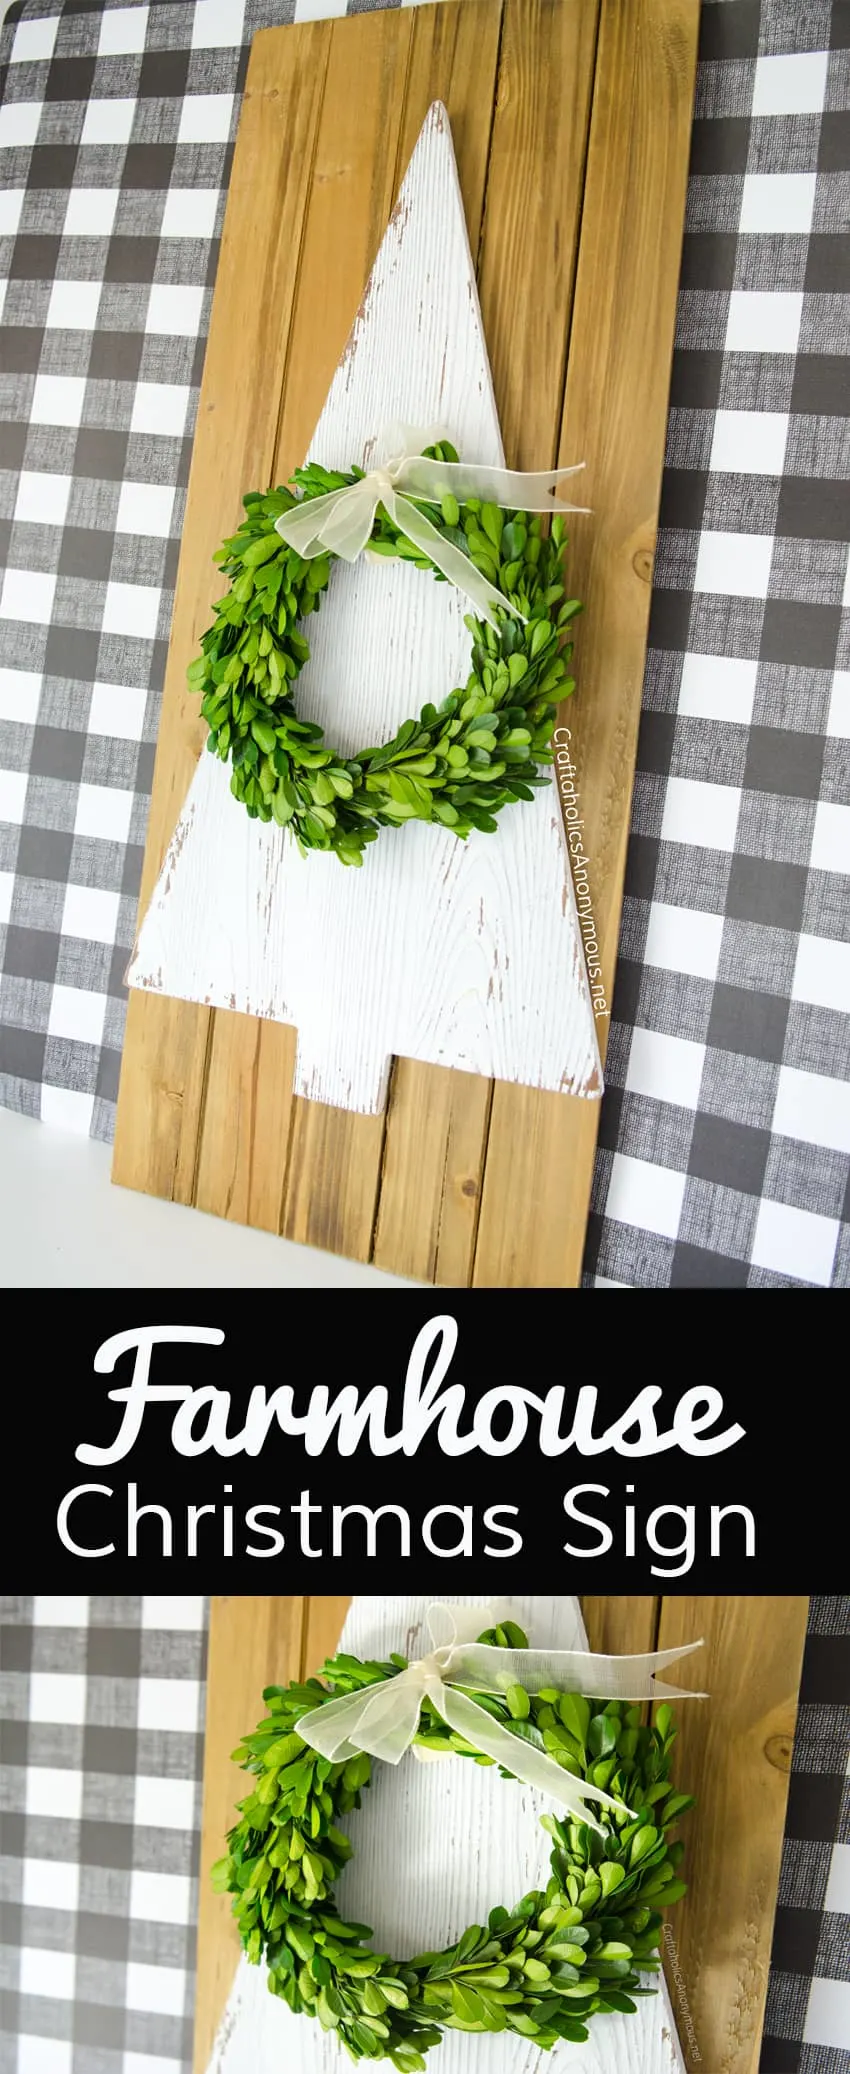 Farmhouse Christmas sign with a tree and a wreath on it